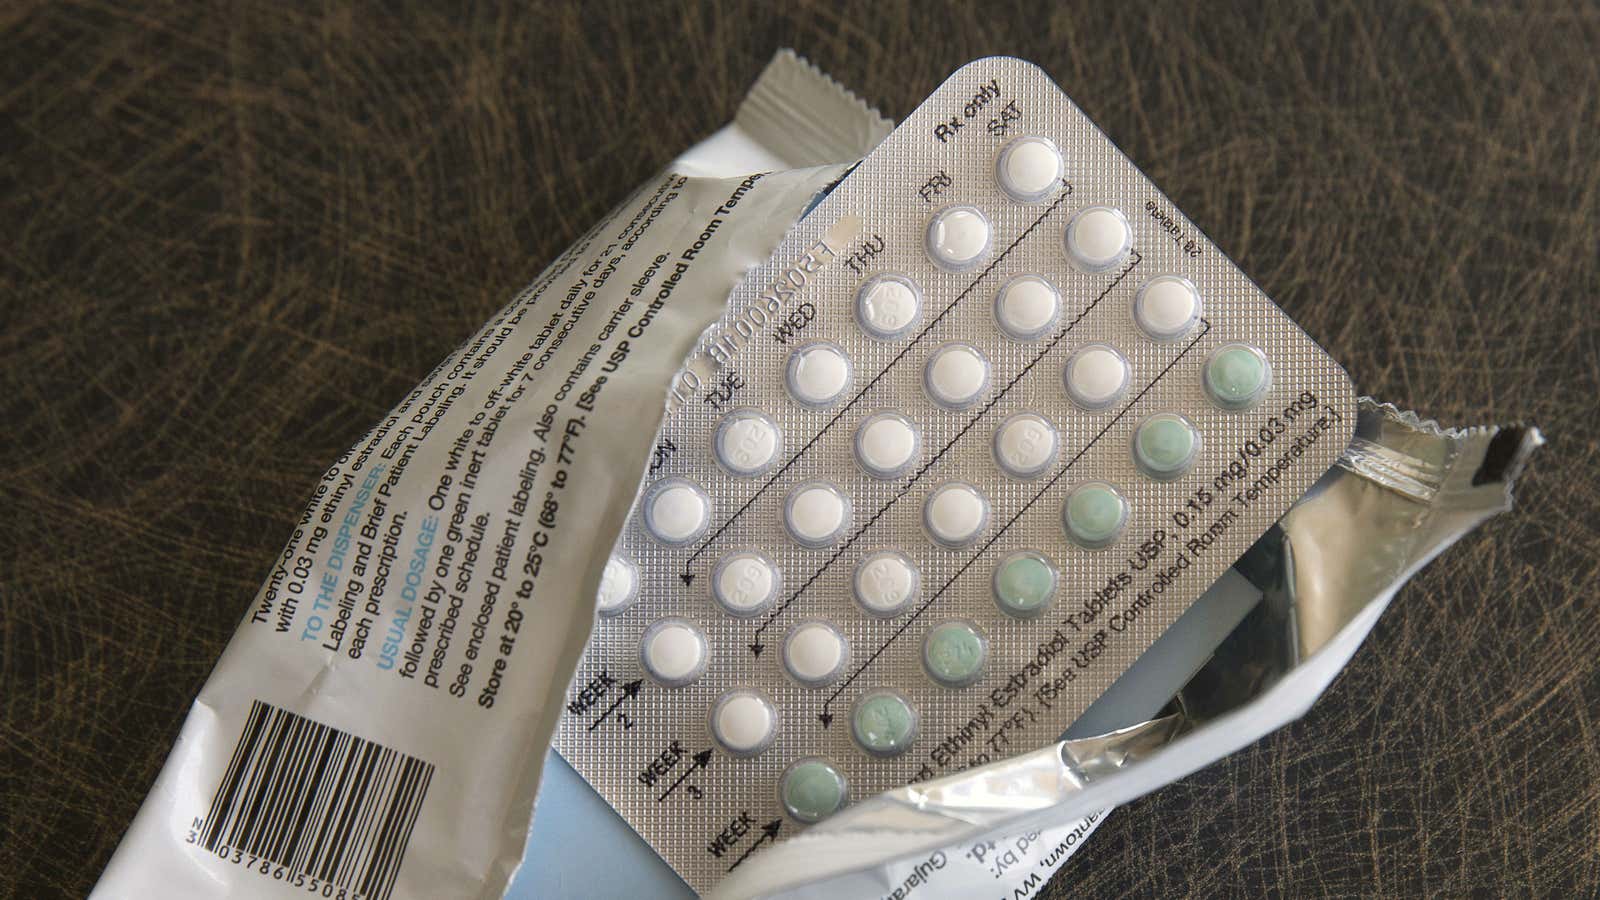 Even newer iterations of hormonal birth control may lead to a slightly increased risk of breast cancer.